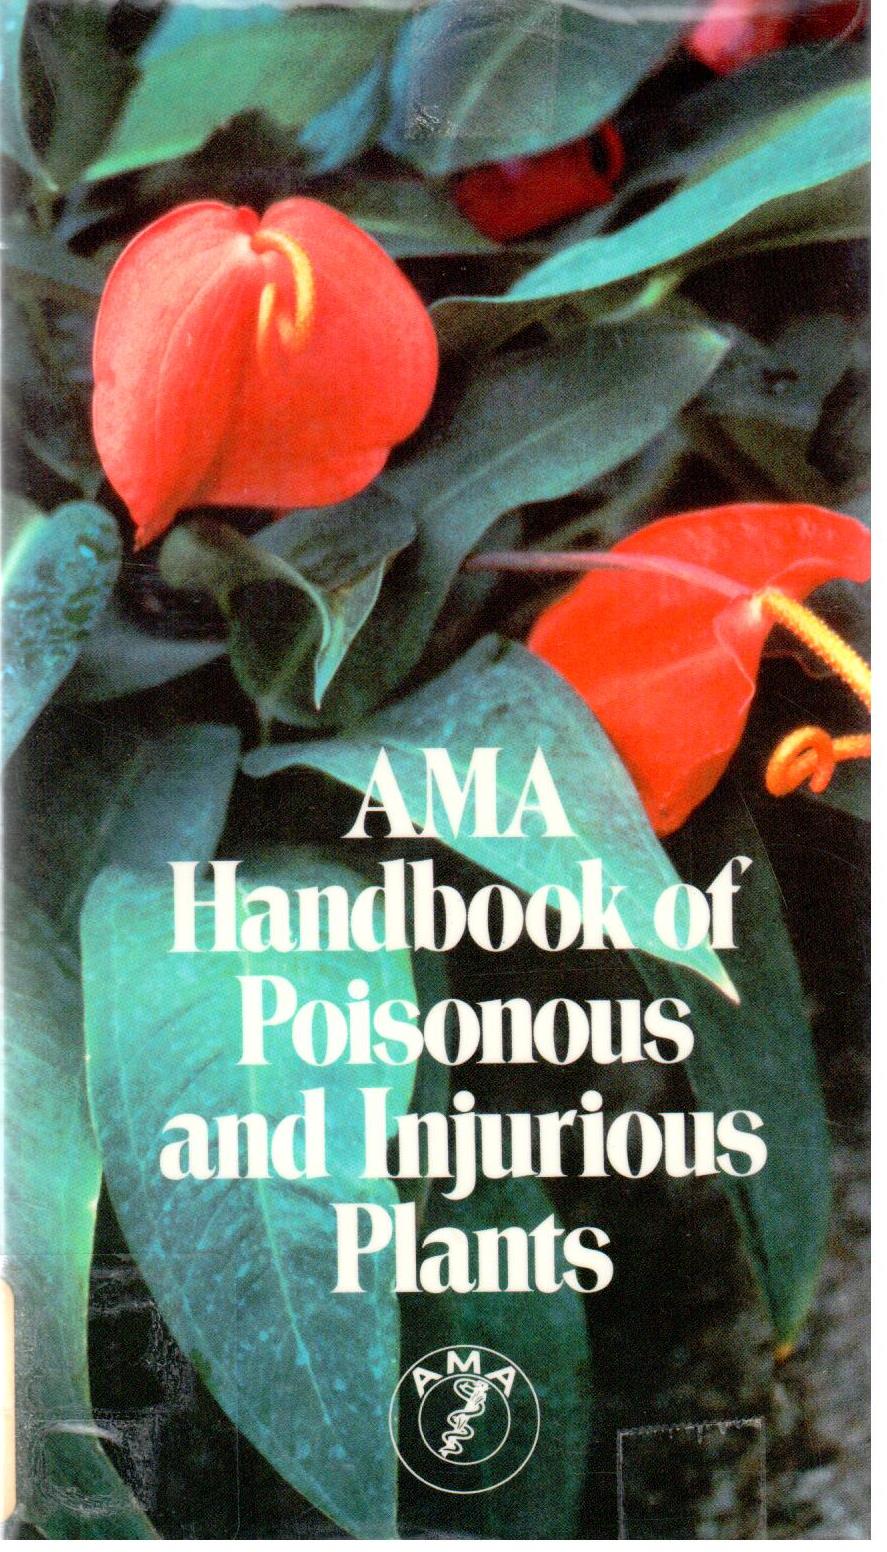 AMA handbool of poisonous and injurious plants